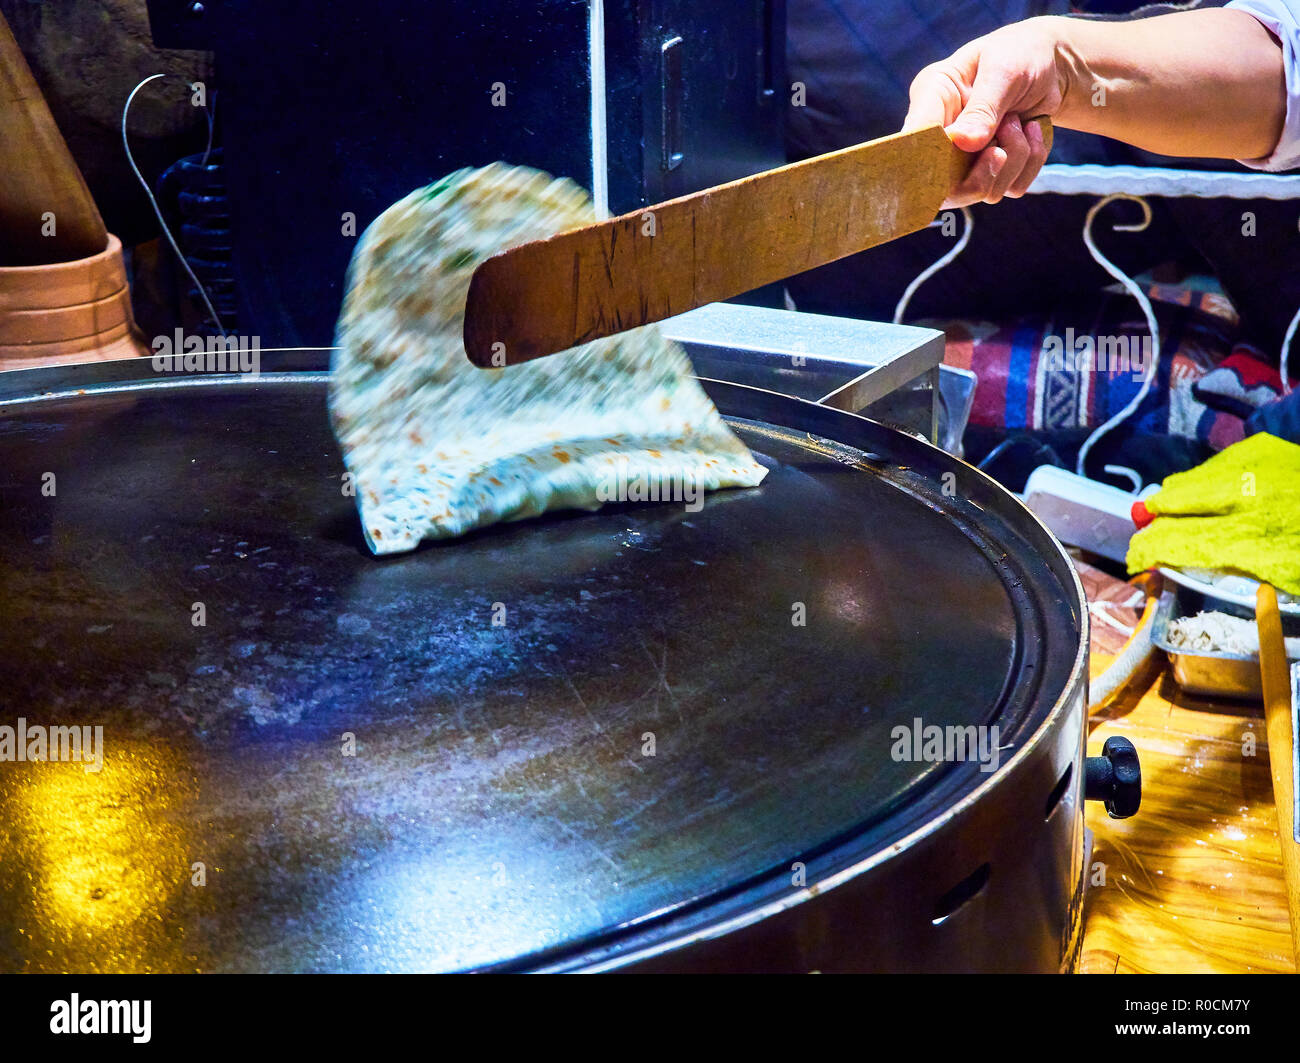 A cook making Turkish Gozleme, a traditional Anatolian stuffed flatbread, cooked over a wood fire on a griddle. Stock Photo